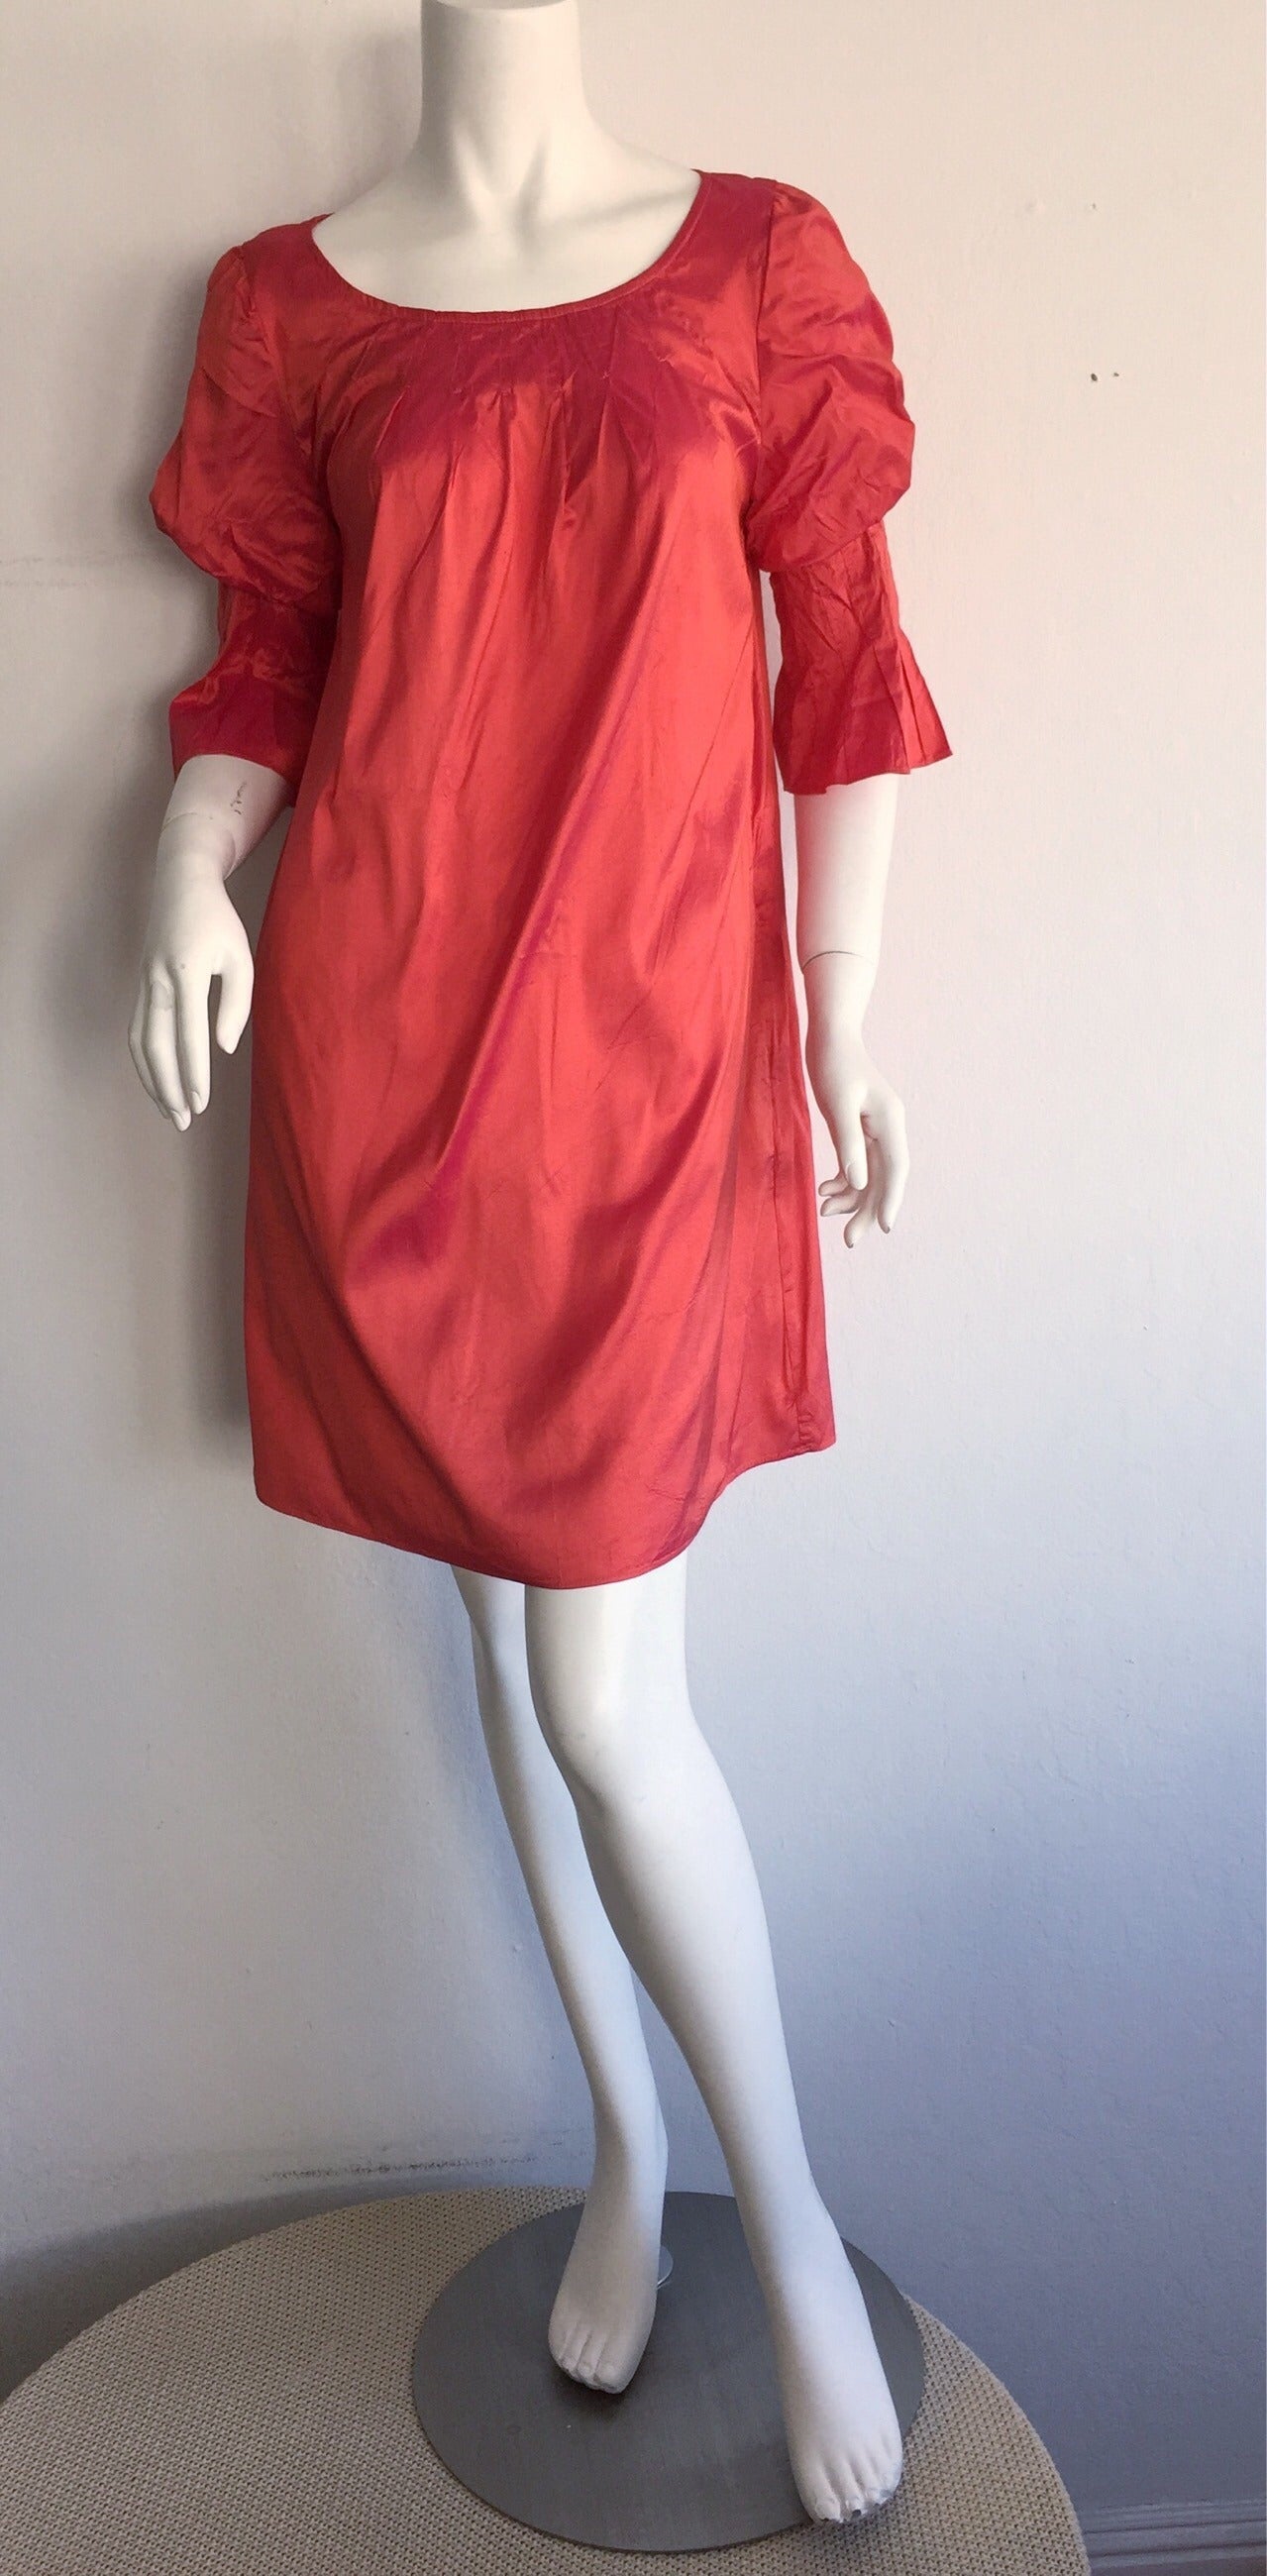 Pretty Nina Ricci iridescent silk dress! Hues of pink and salmon when looked at from different angles. Features two pockets at waist. Looks great belted, or alone. Very forgiving babydoll fit! Perfect with flats, sandals, wedges or heels! Flattering